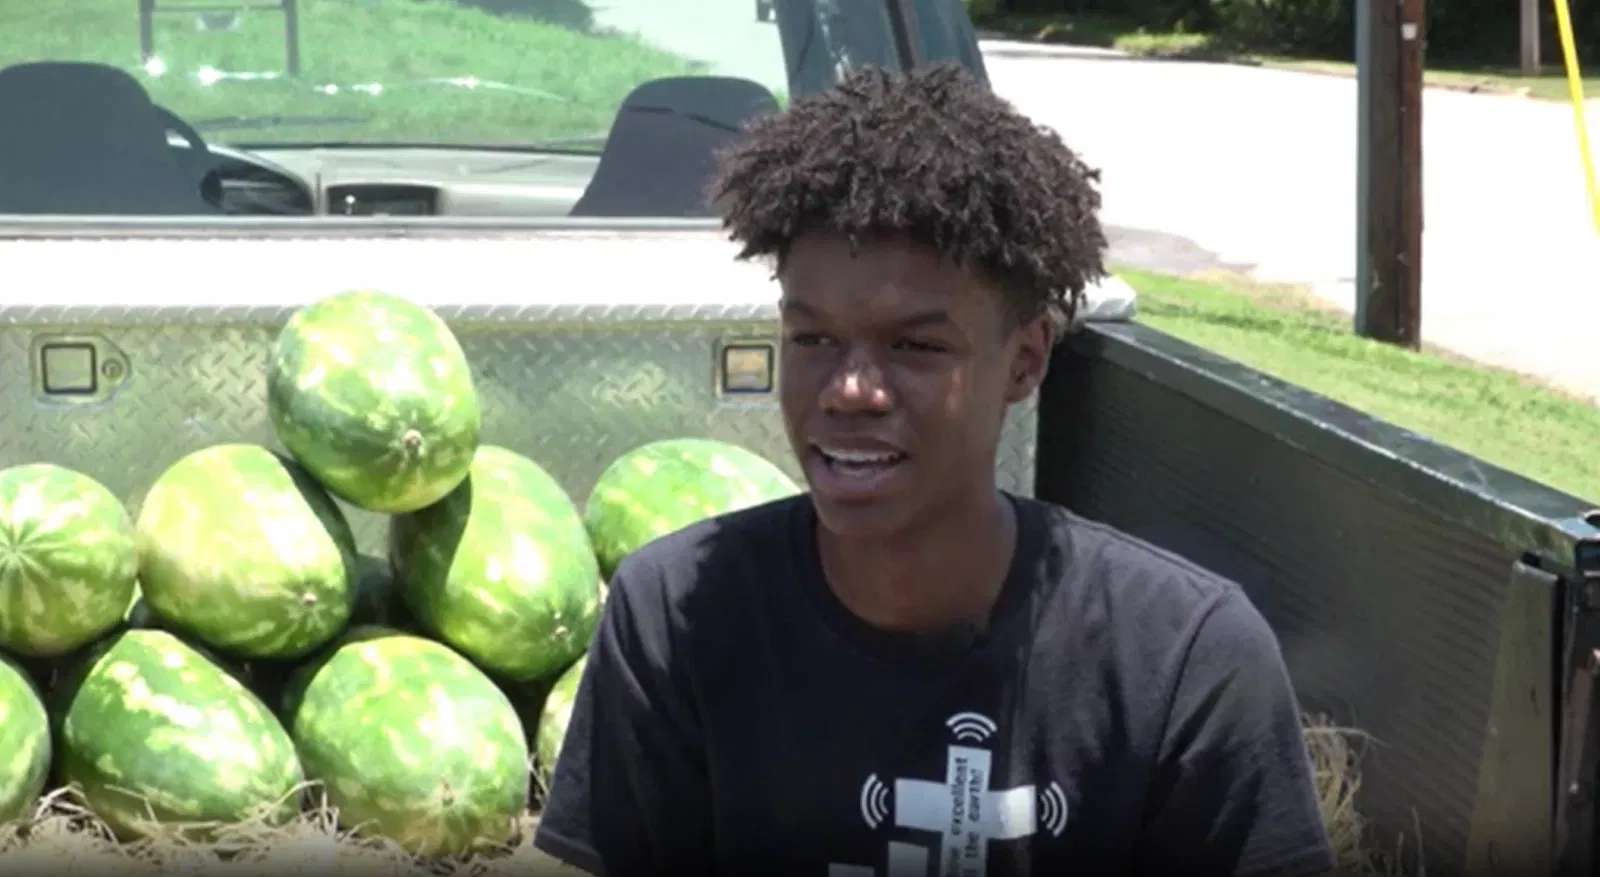 17-year-old sells watermelons to fund college dream